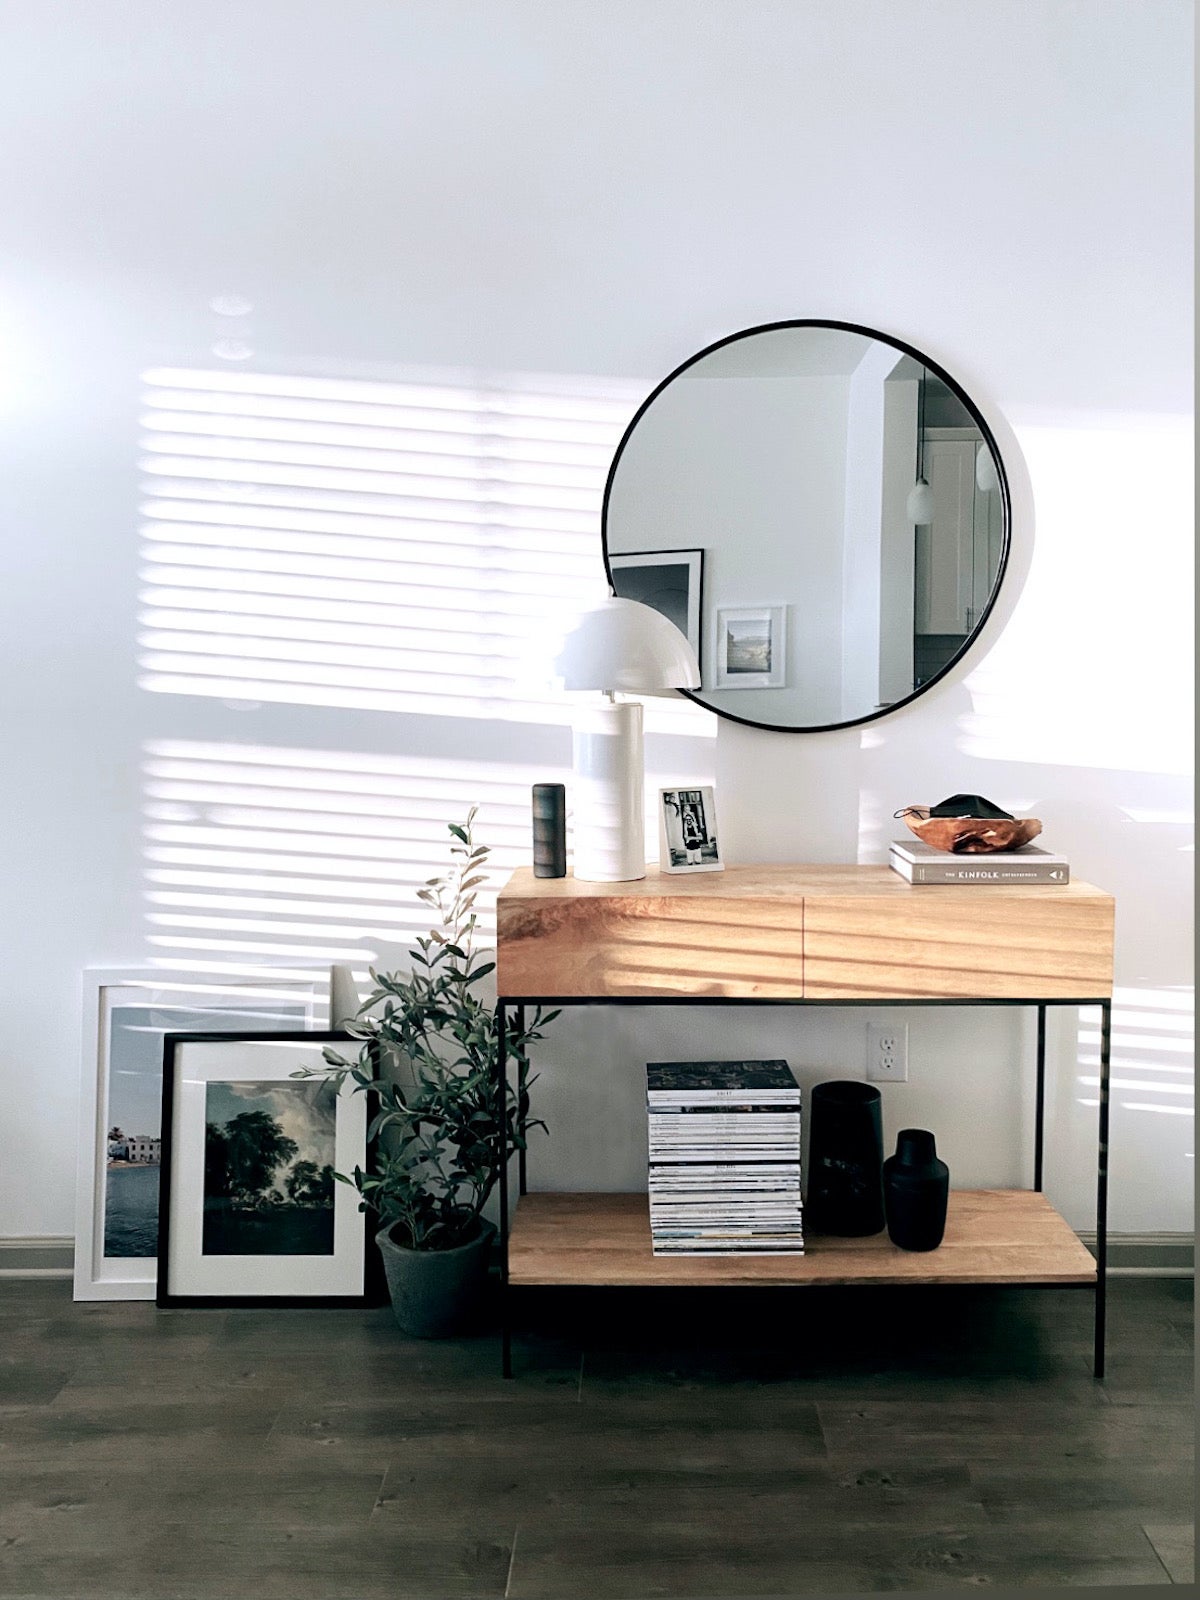 Two large Artifact Uprising Gallery Frames on the ground layered one in front of the other against the wall next to a credenza, house plant, and mirror